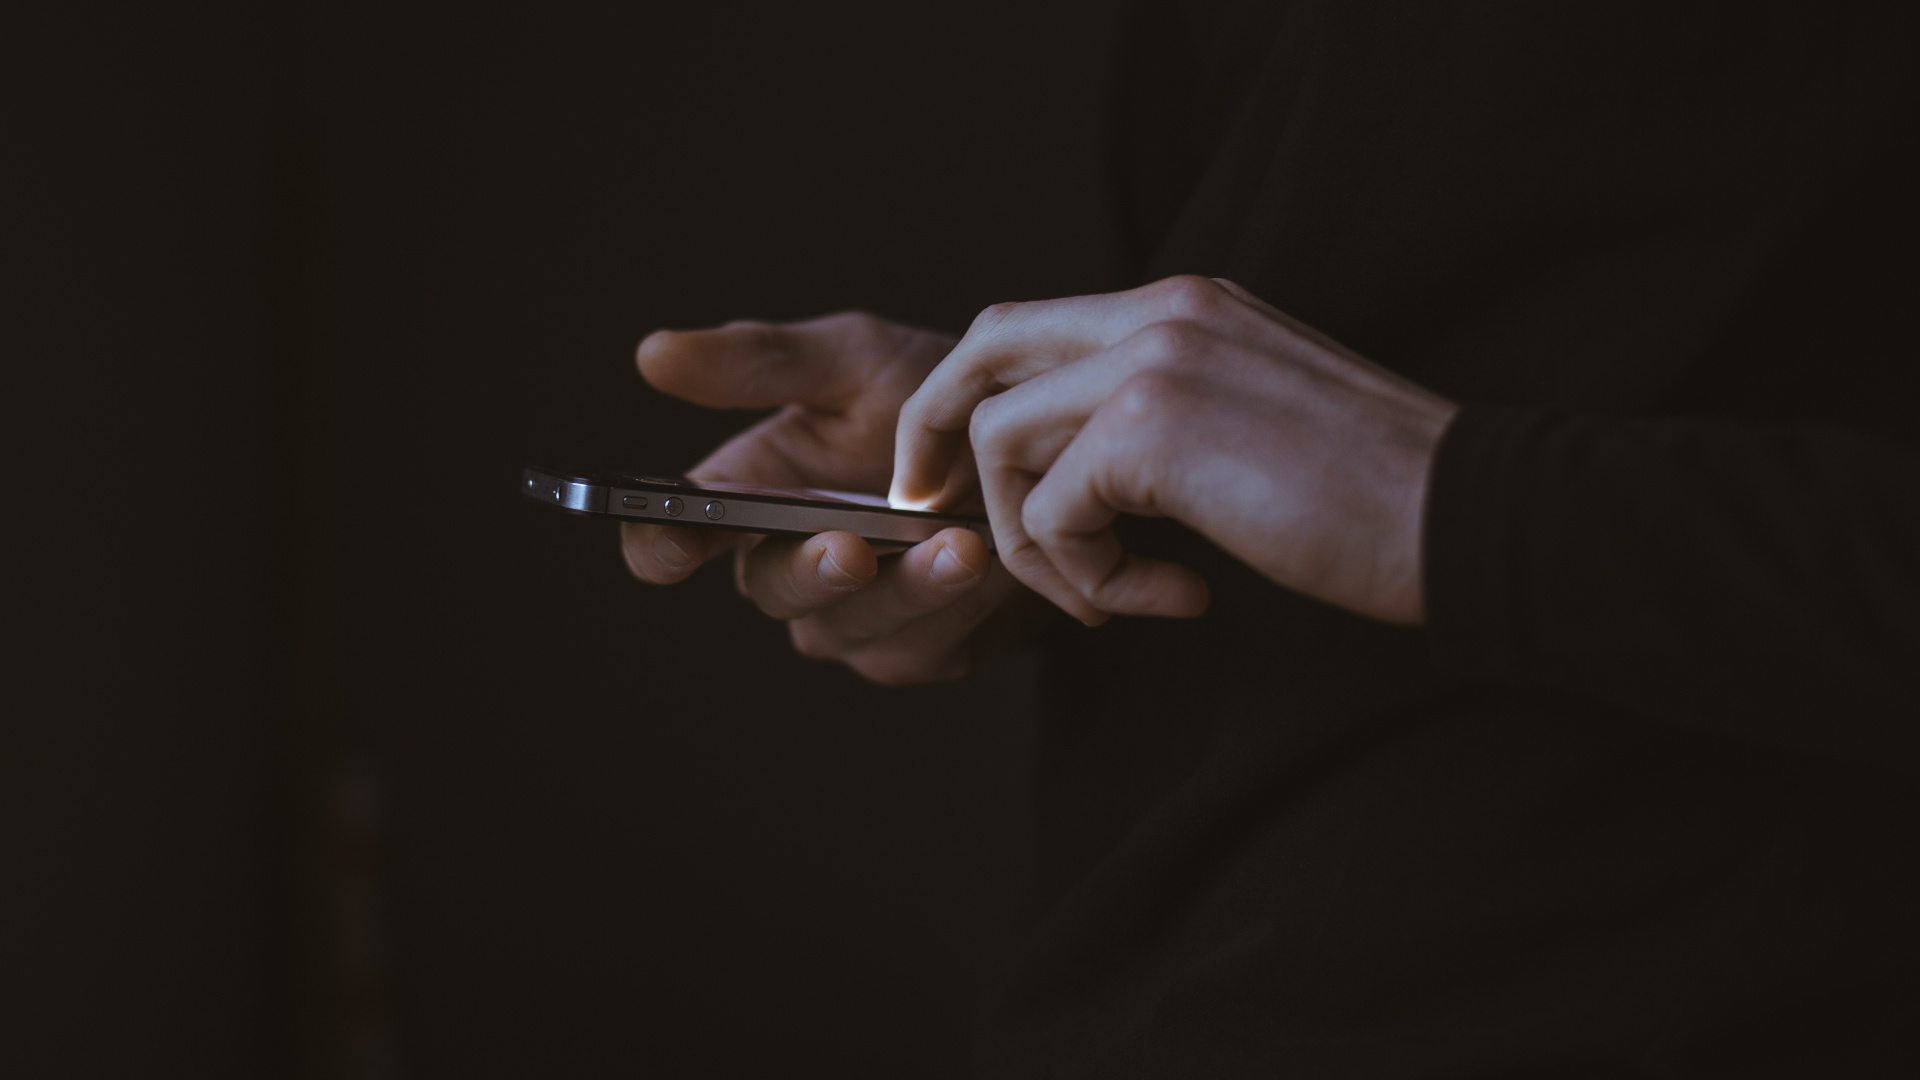 hands on a dark background holding a phone